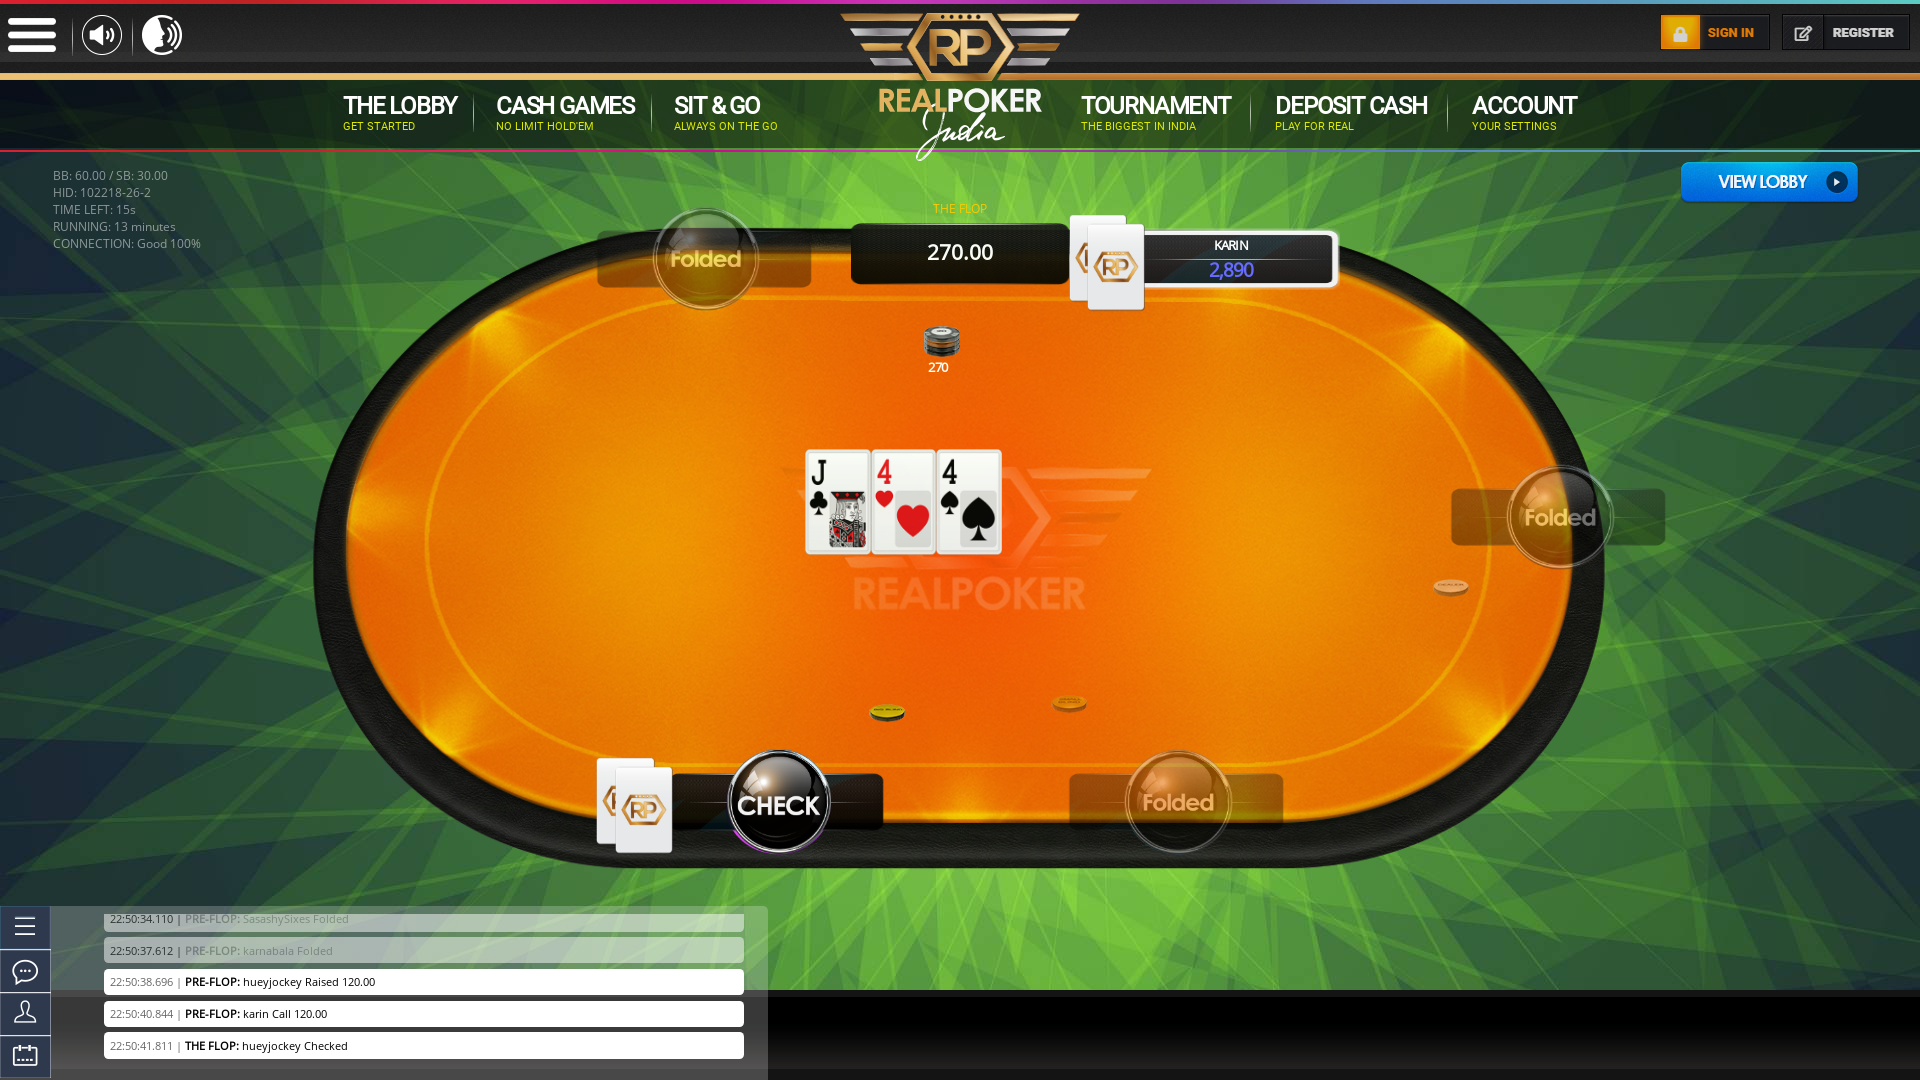 6 player texas holdem table at real poker with the table id 102218